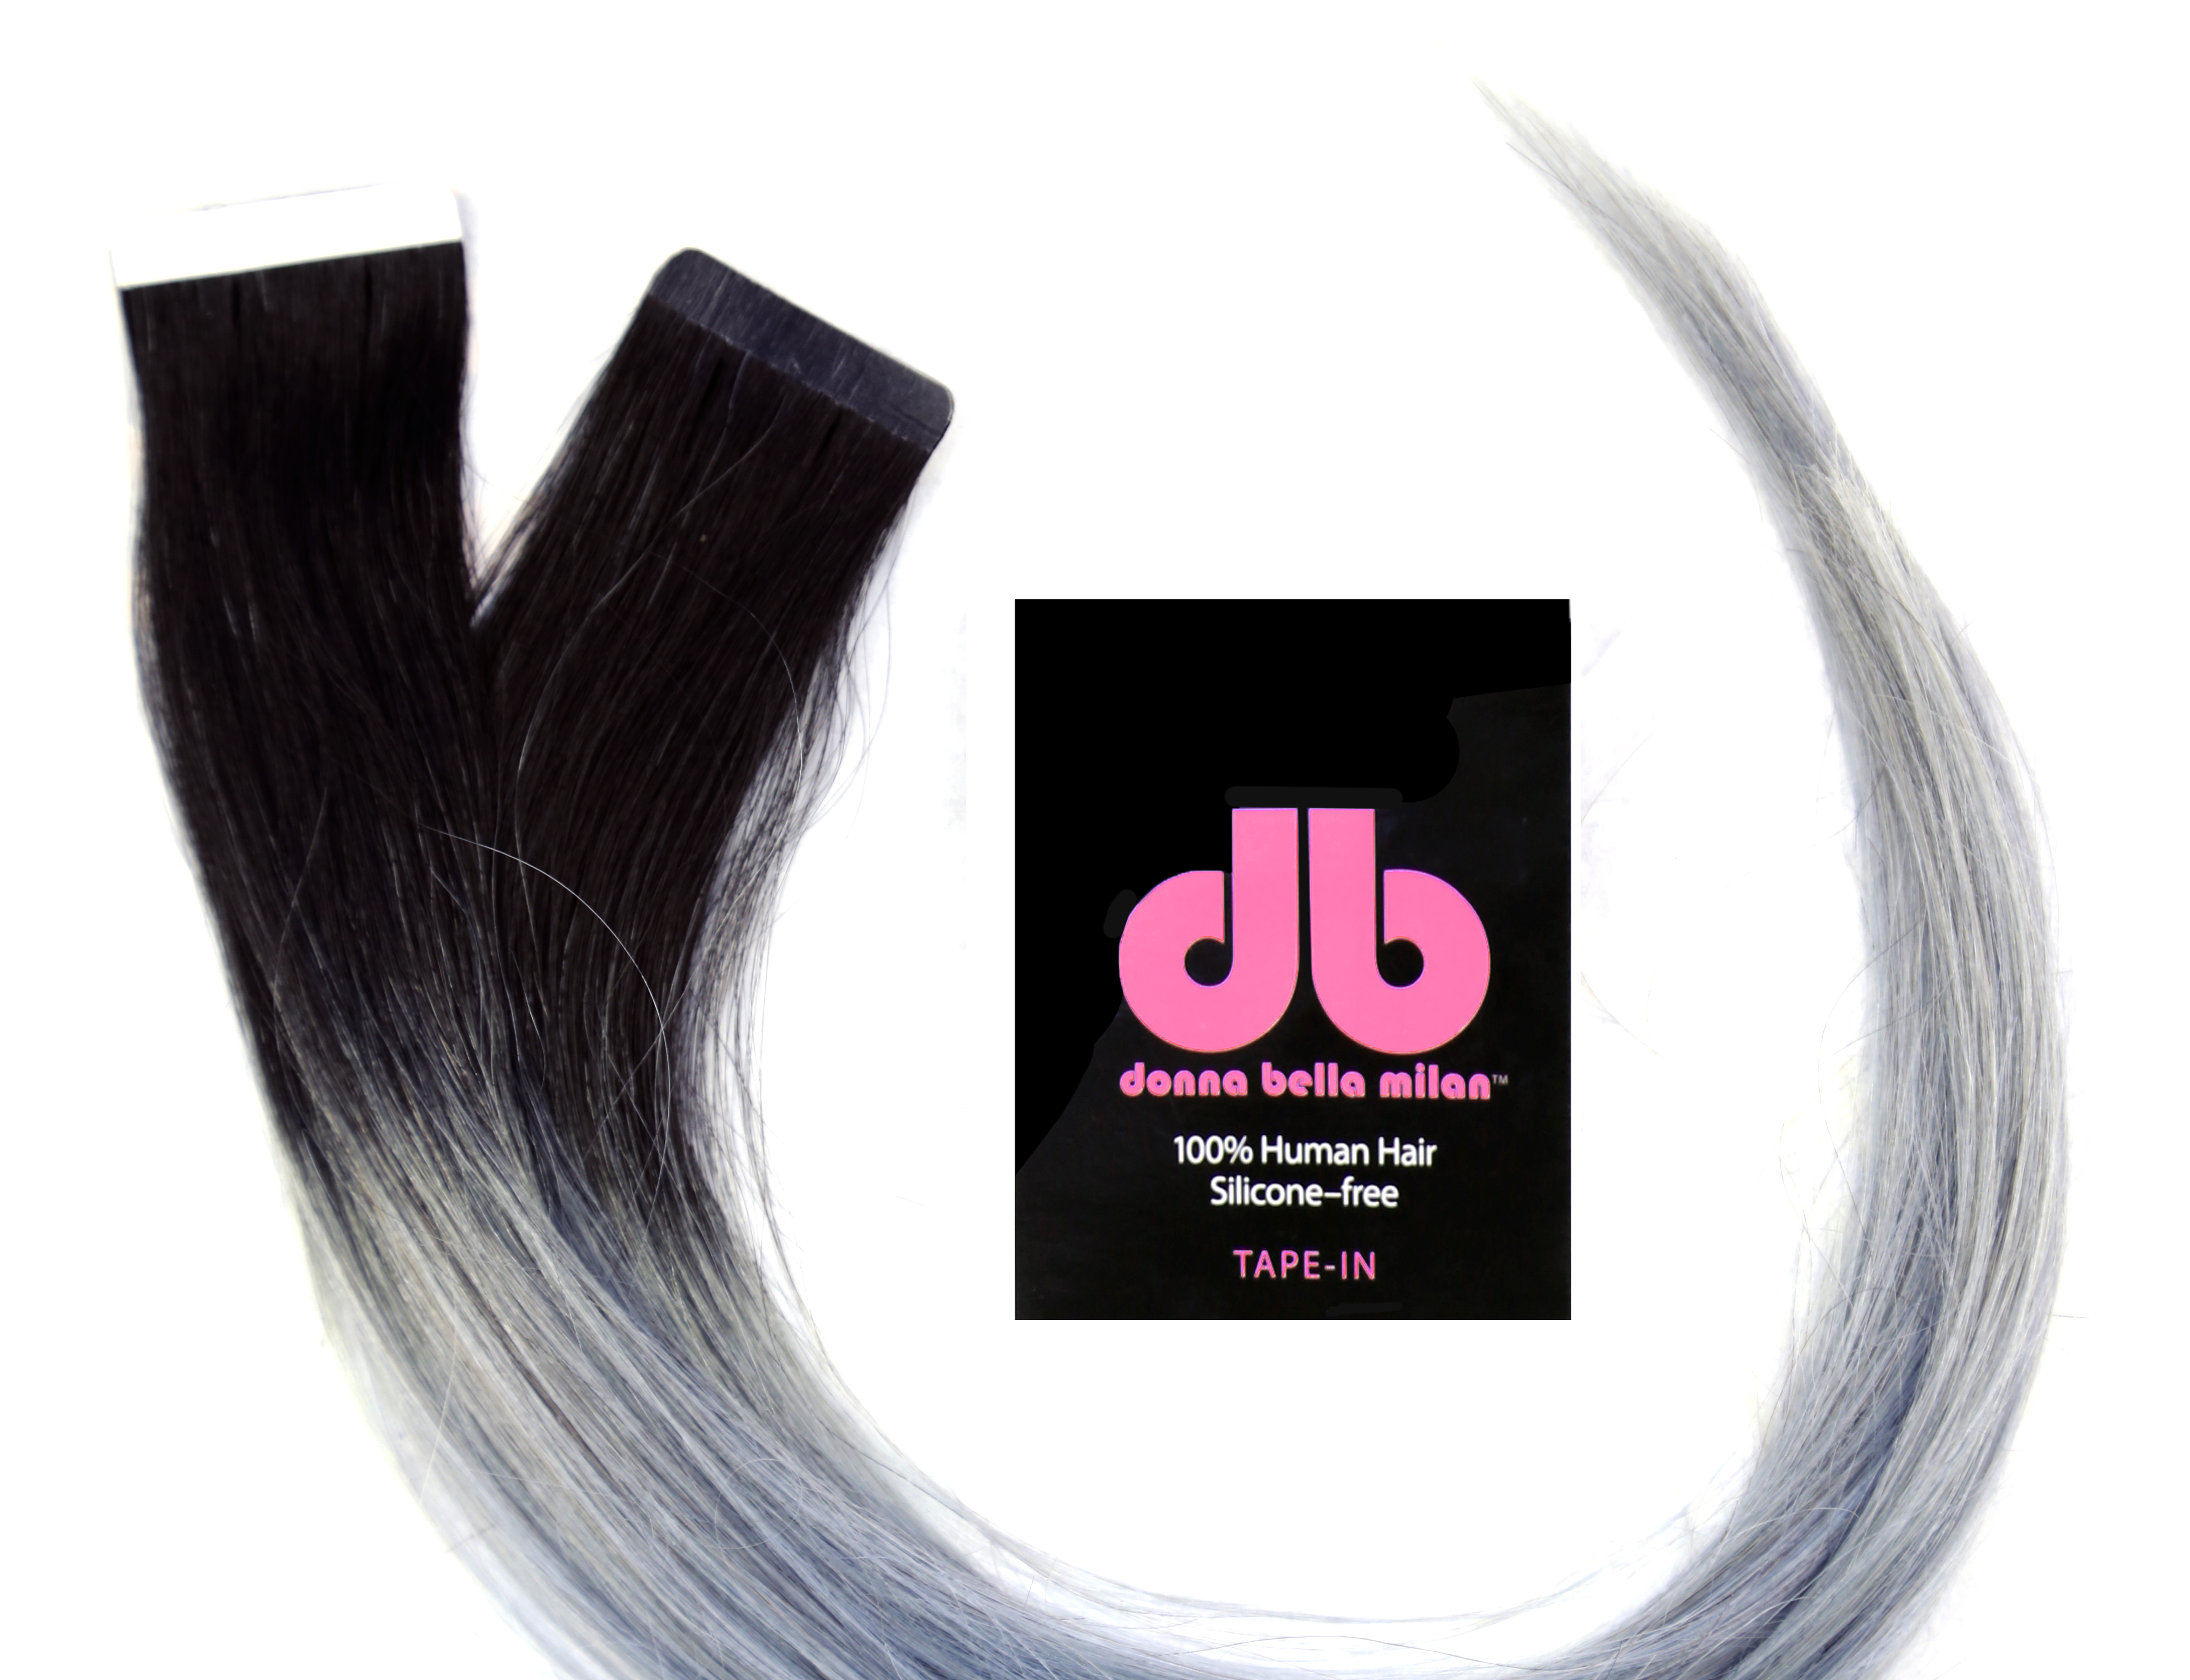 Donna Bella Silver Hair Extensions Honest Review